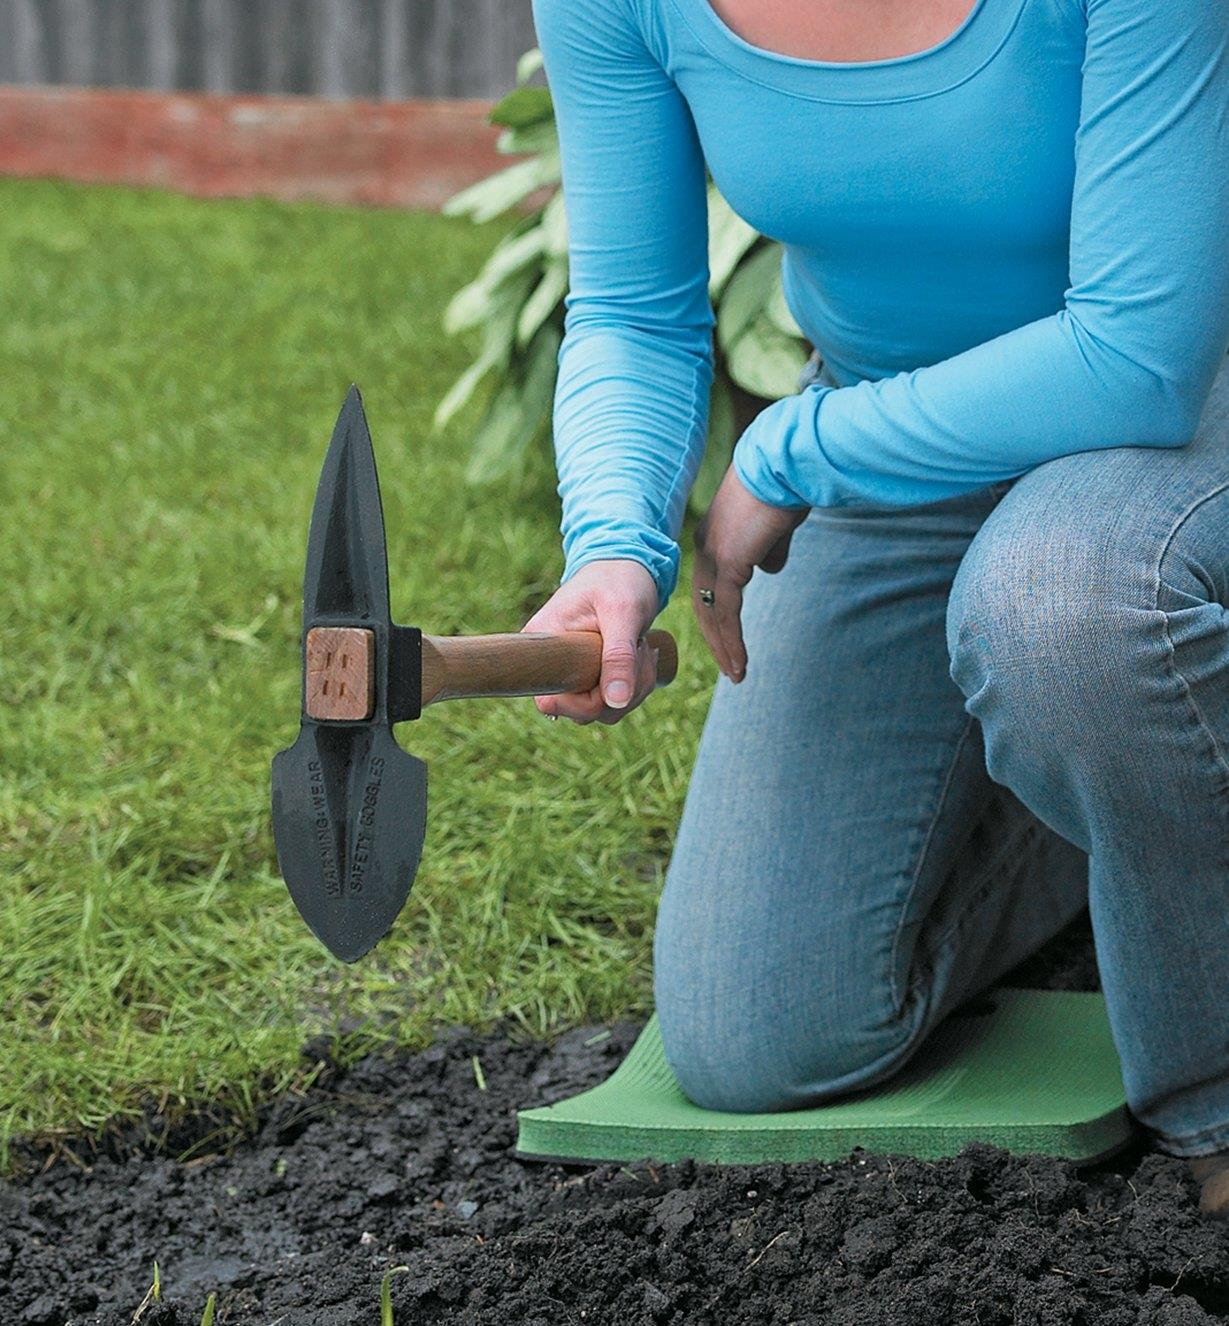 Using a Mini Planter to dig in garden soil